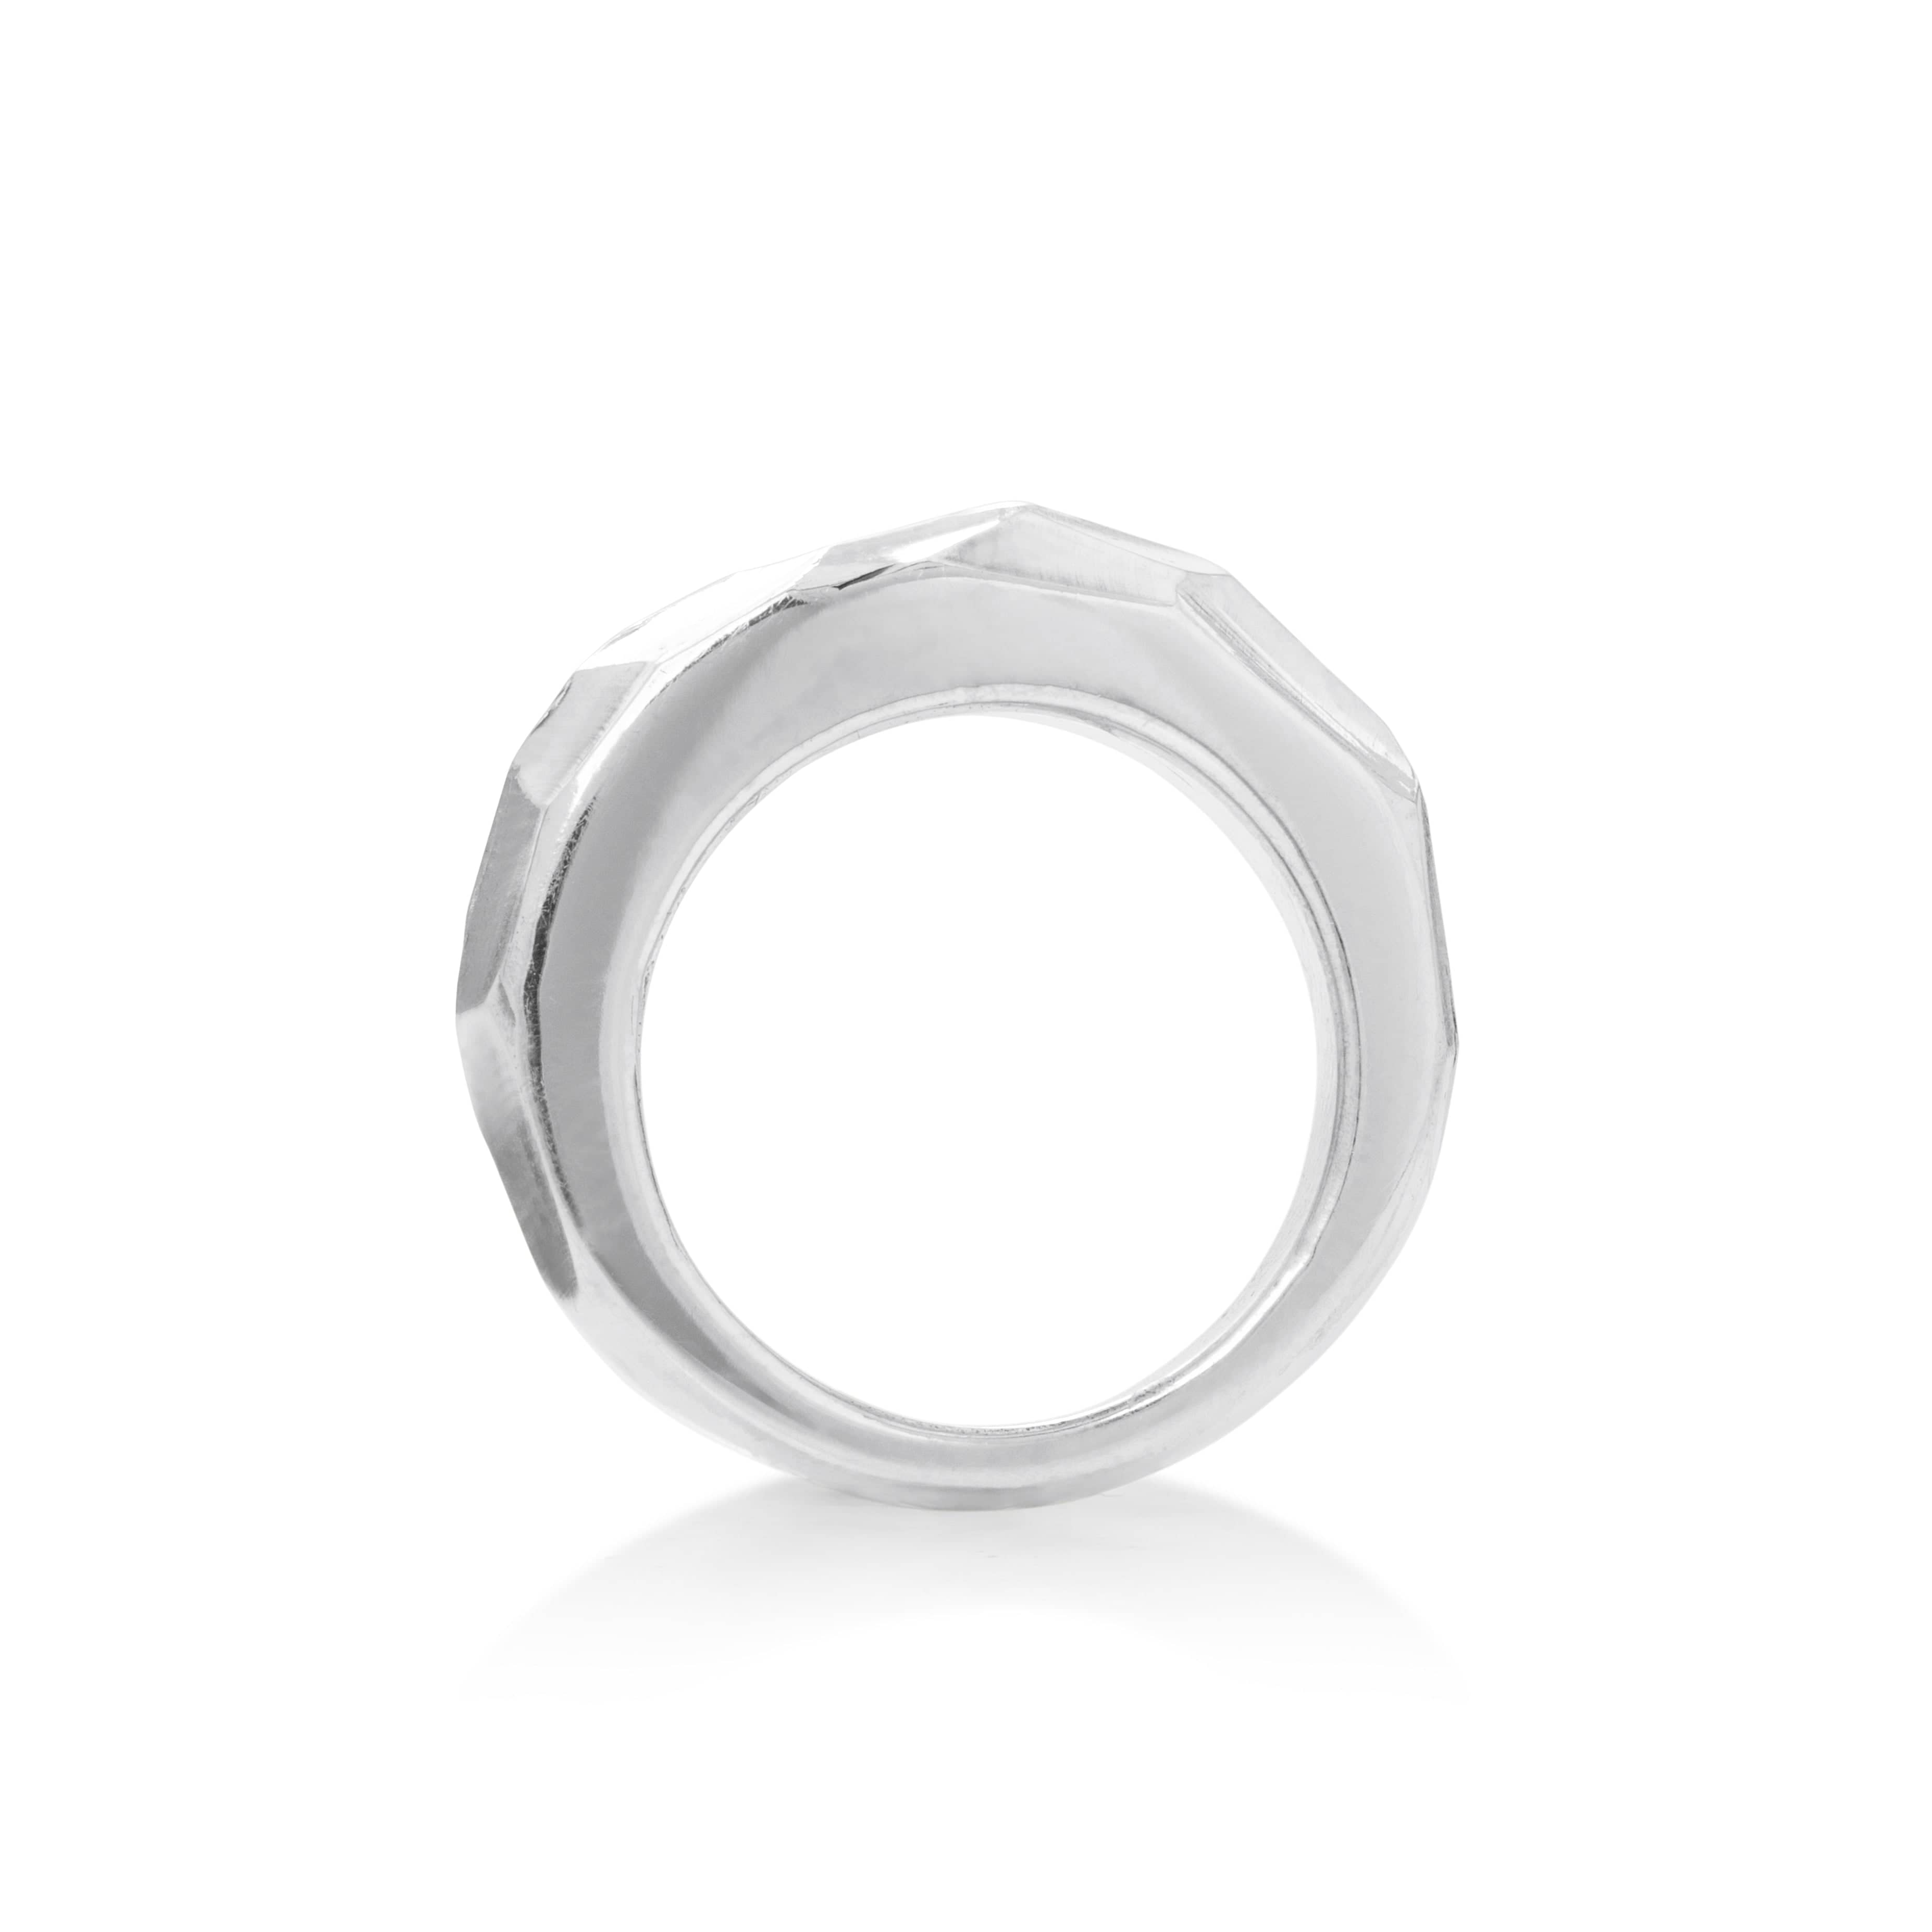 Solid Sterling Silver band, chiseled edges decorate the dome shaped ring side view